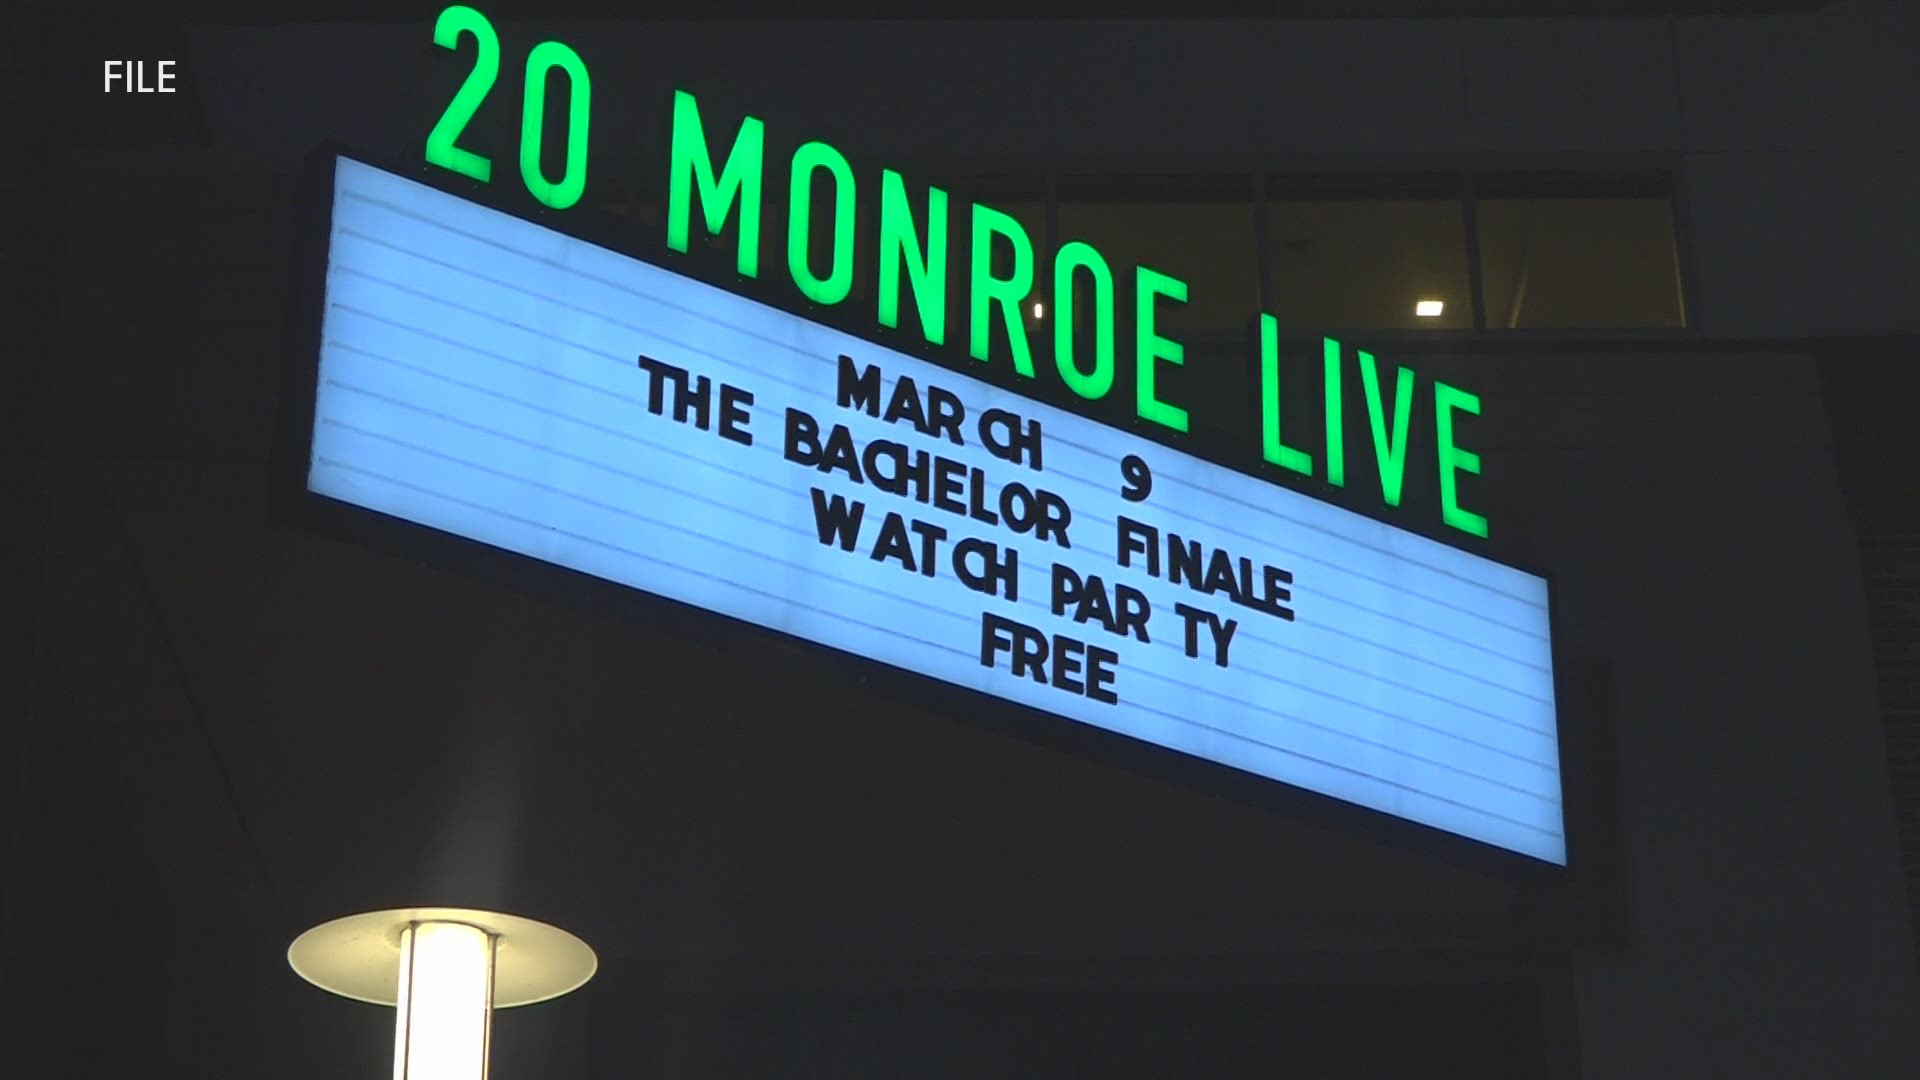 20 Monroe Live and The B.O.B. both owned by the Gilmore Collection, are up for sale. Pure Real Estate Brokerage is listed as the firm in the dealings.